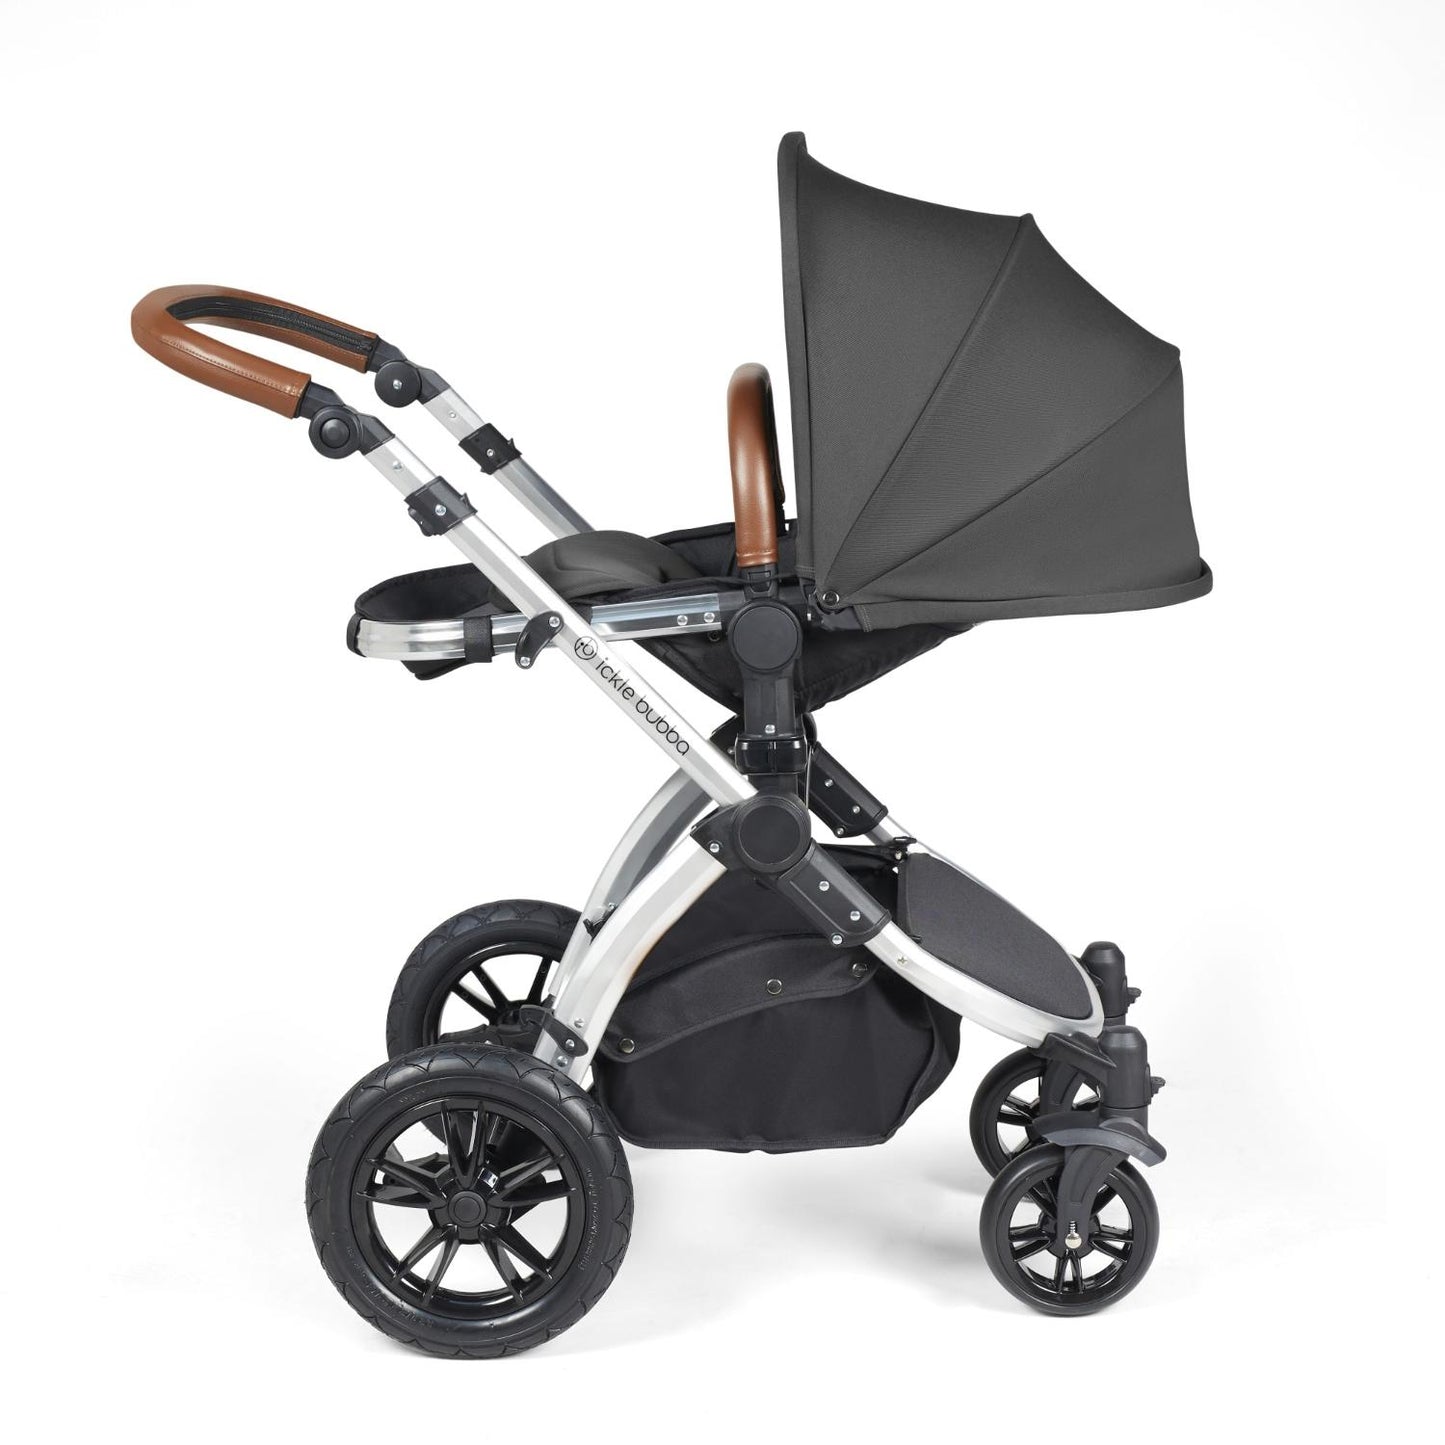 Recline position of Ickle Bubba Stomp Luxe Pushchair in Charcoal Grey colour with silver chassis and tan handle